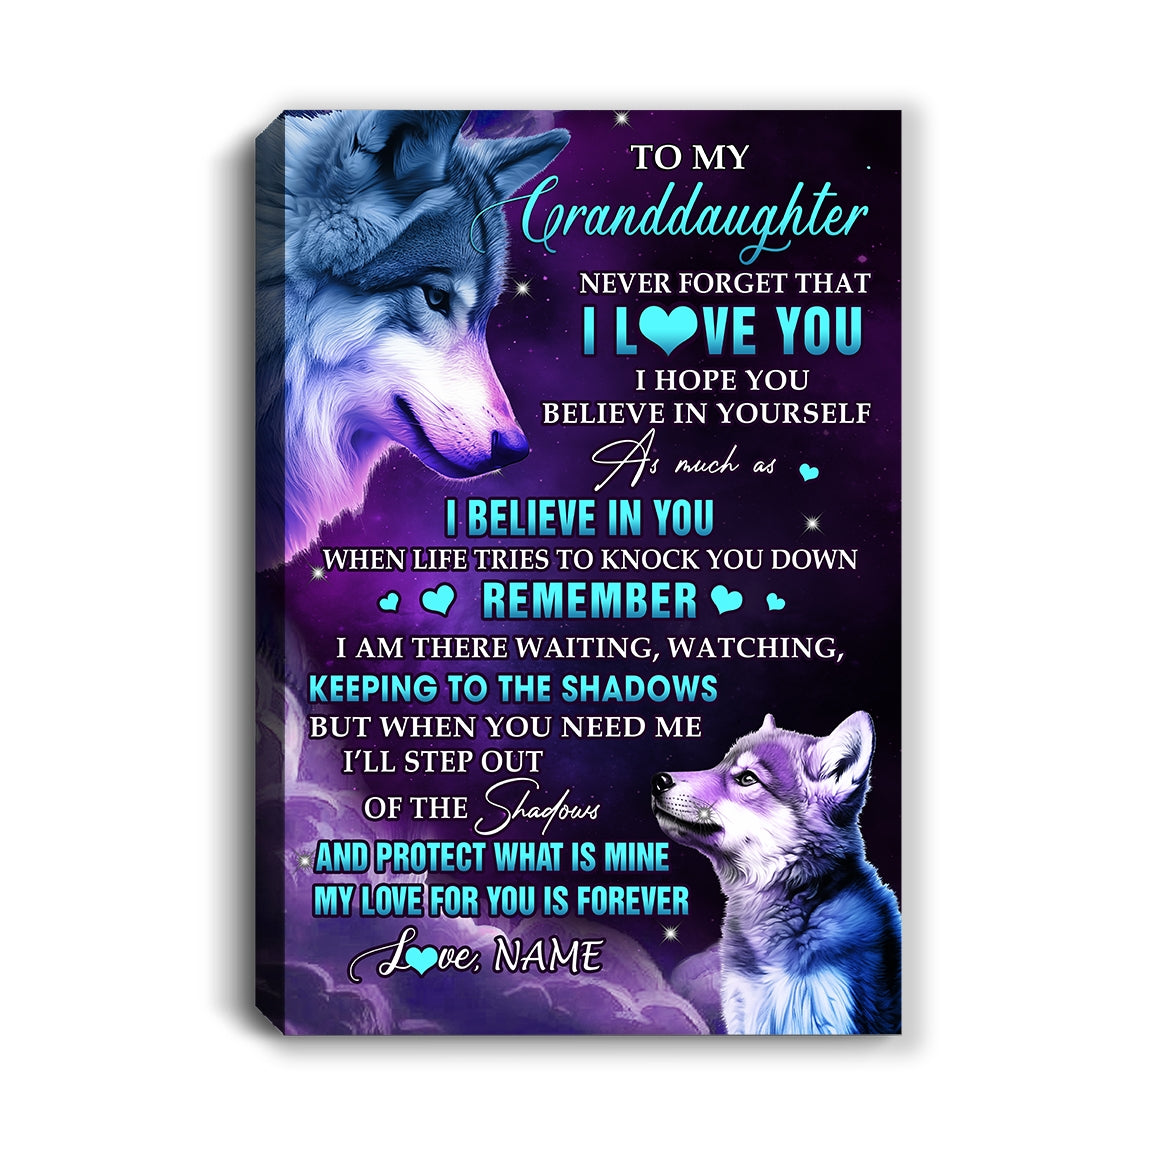 Personalized_To_My_Granddaughter_Canvas_From_Grandma_Wolf_Moon_My_Love_For_You_Is_Forever_Granddaughter_Birthday_Gifts_Christmas_Custom_Wall_Art_Print_Framed_Canvas_Canvas_mockup_1.jpg